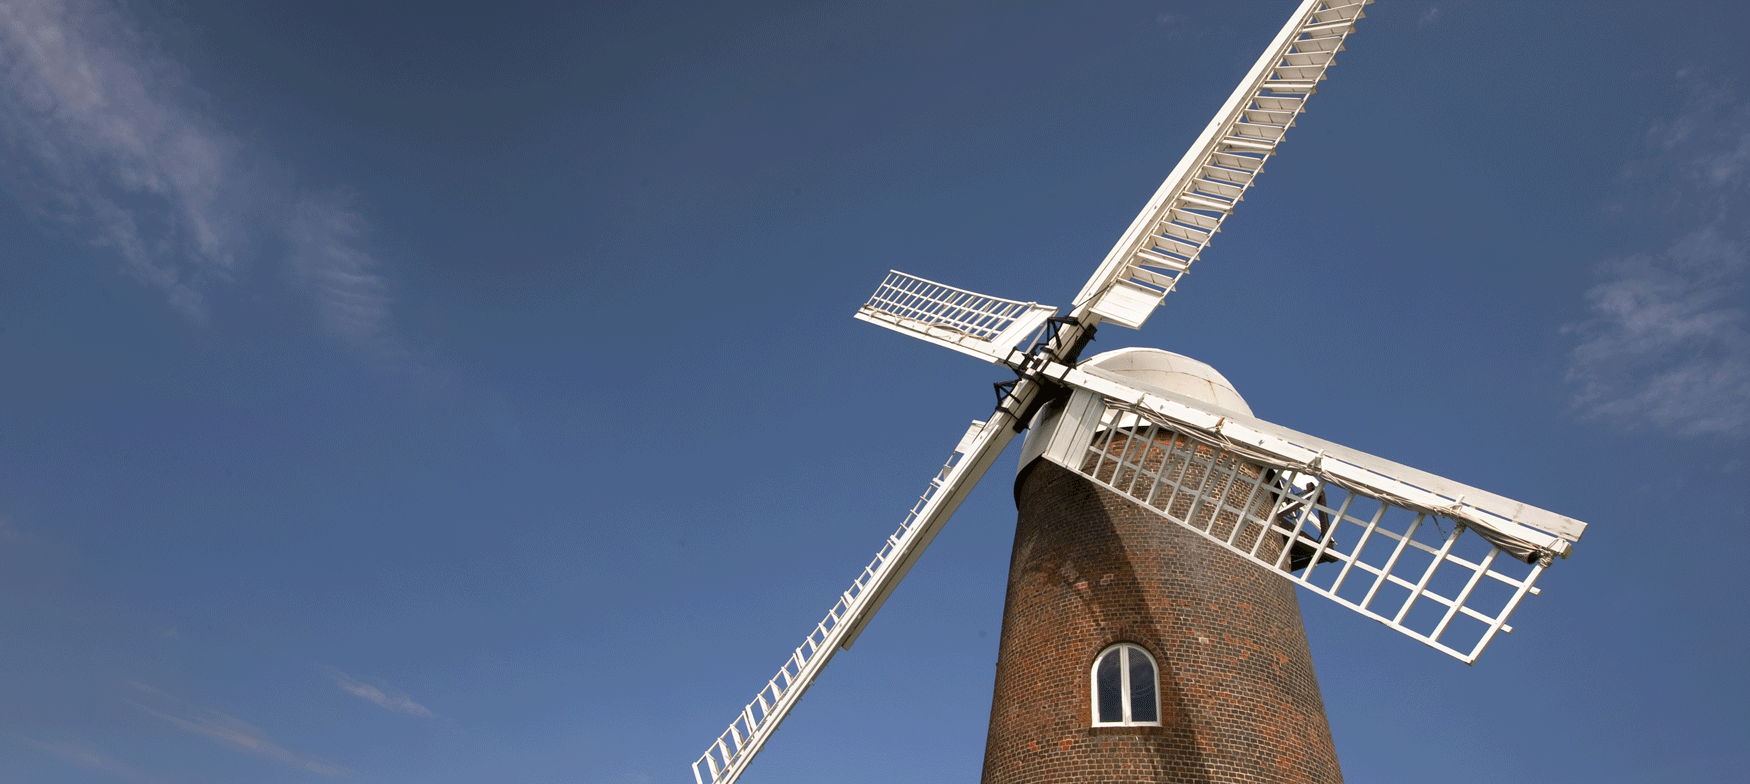 Windmill with bright blue sky